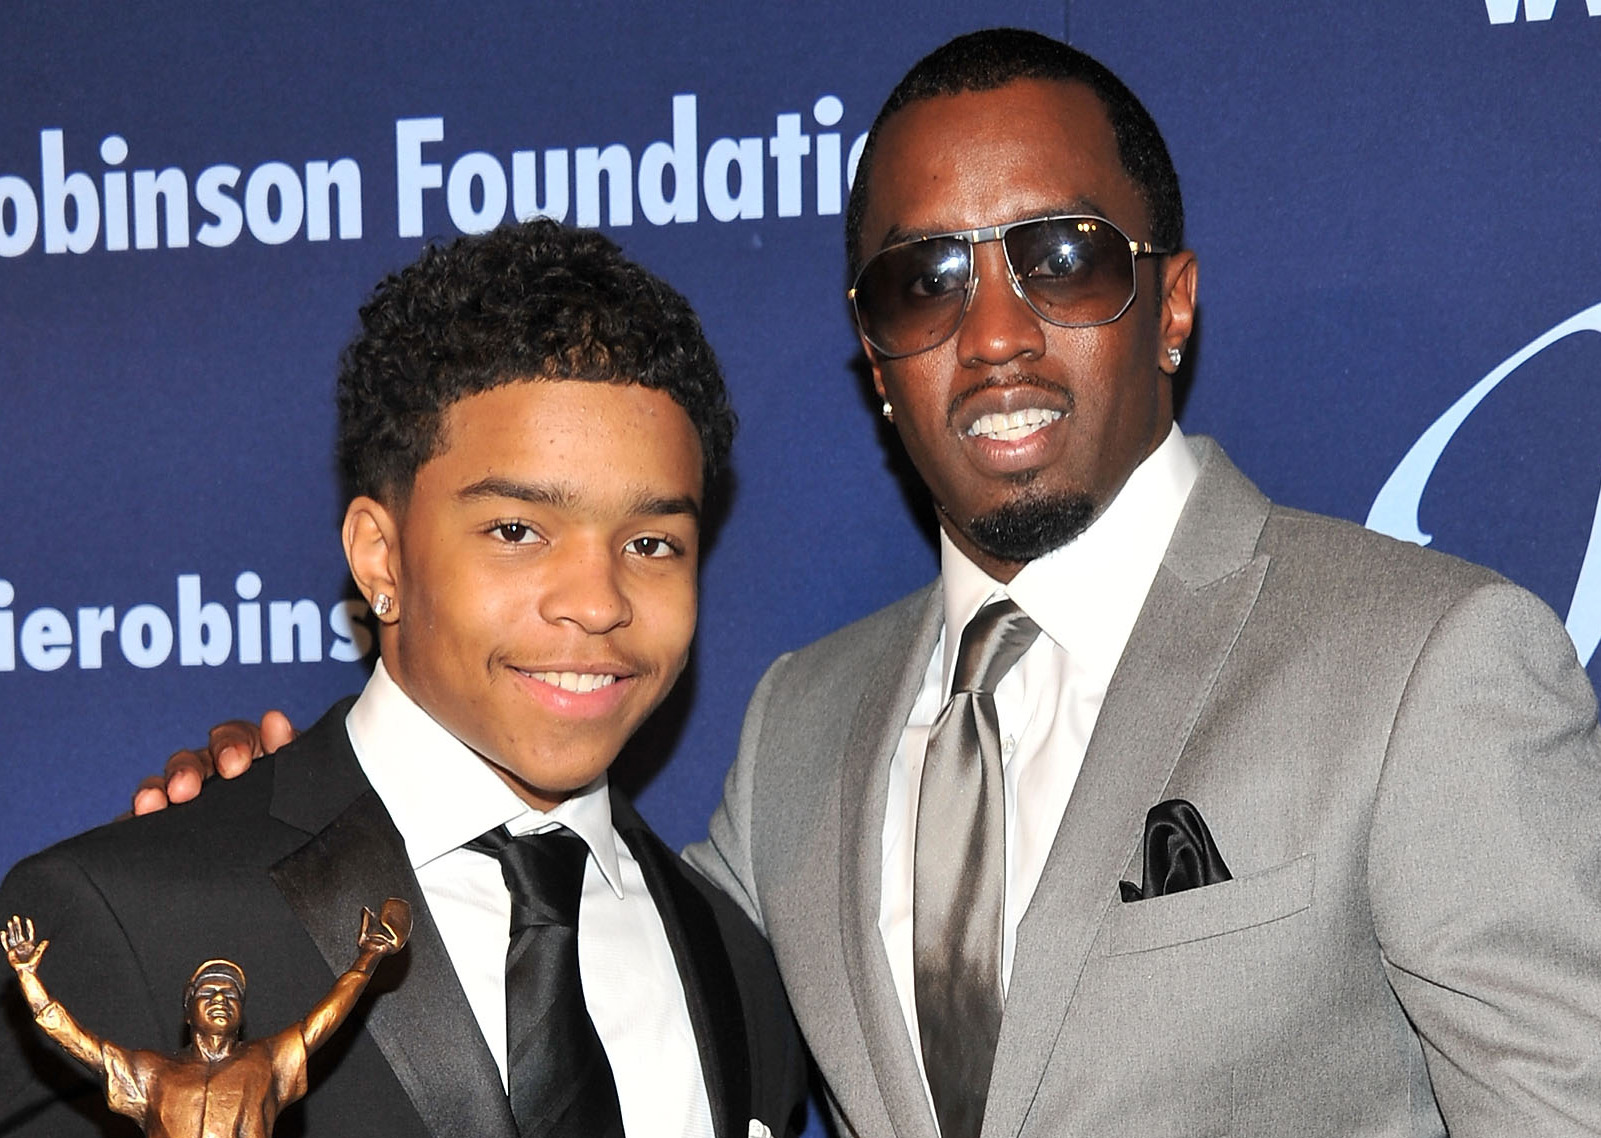 Just over a week ago, the internet was going crazy after Sean Diddy Combs.....